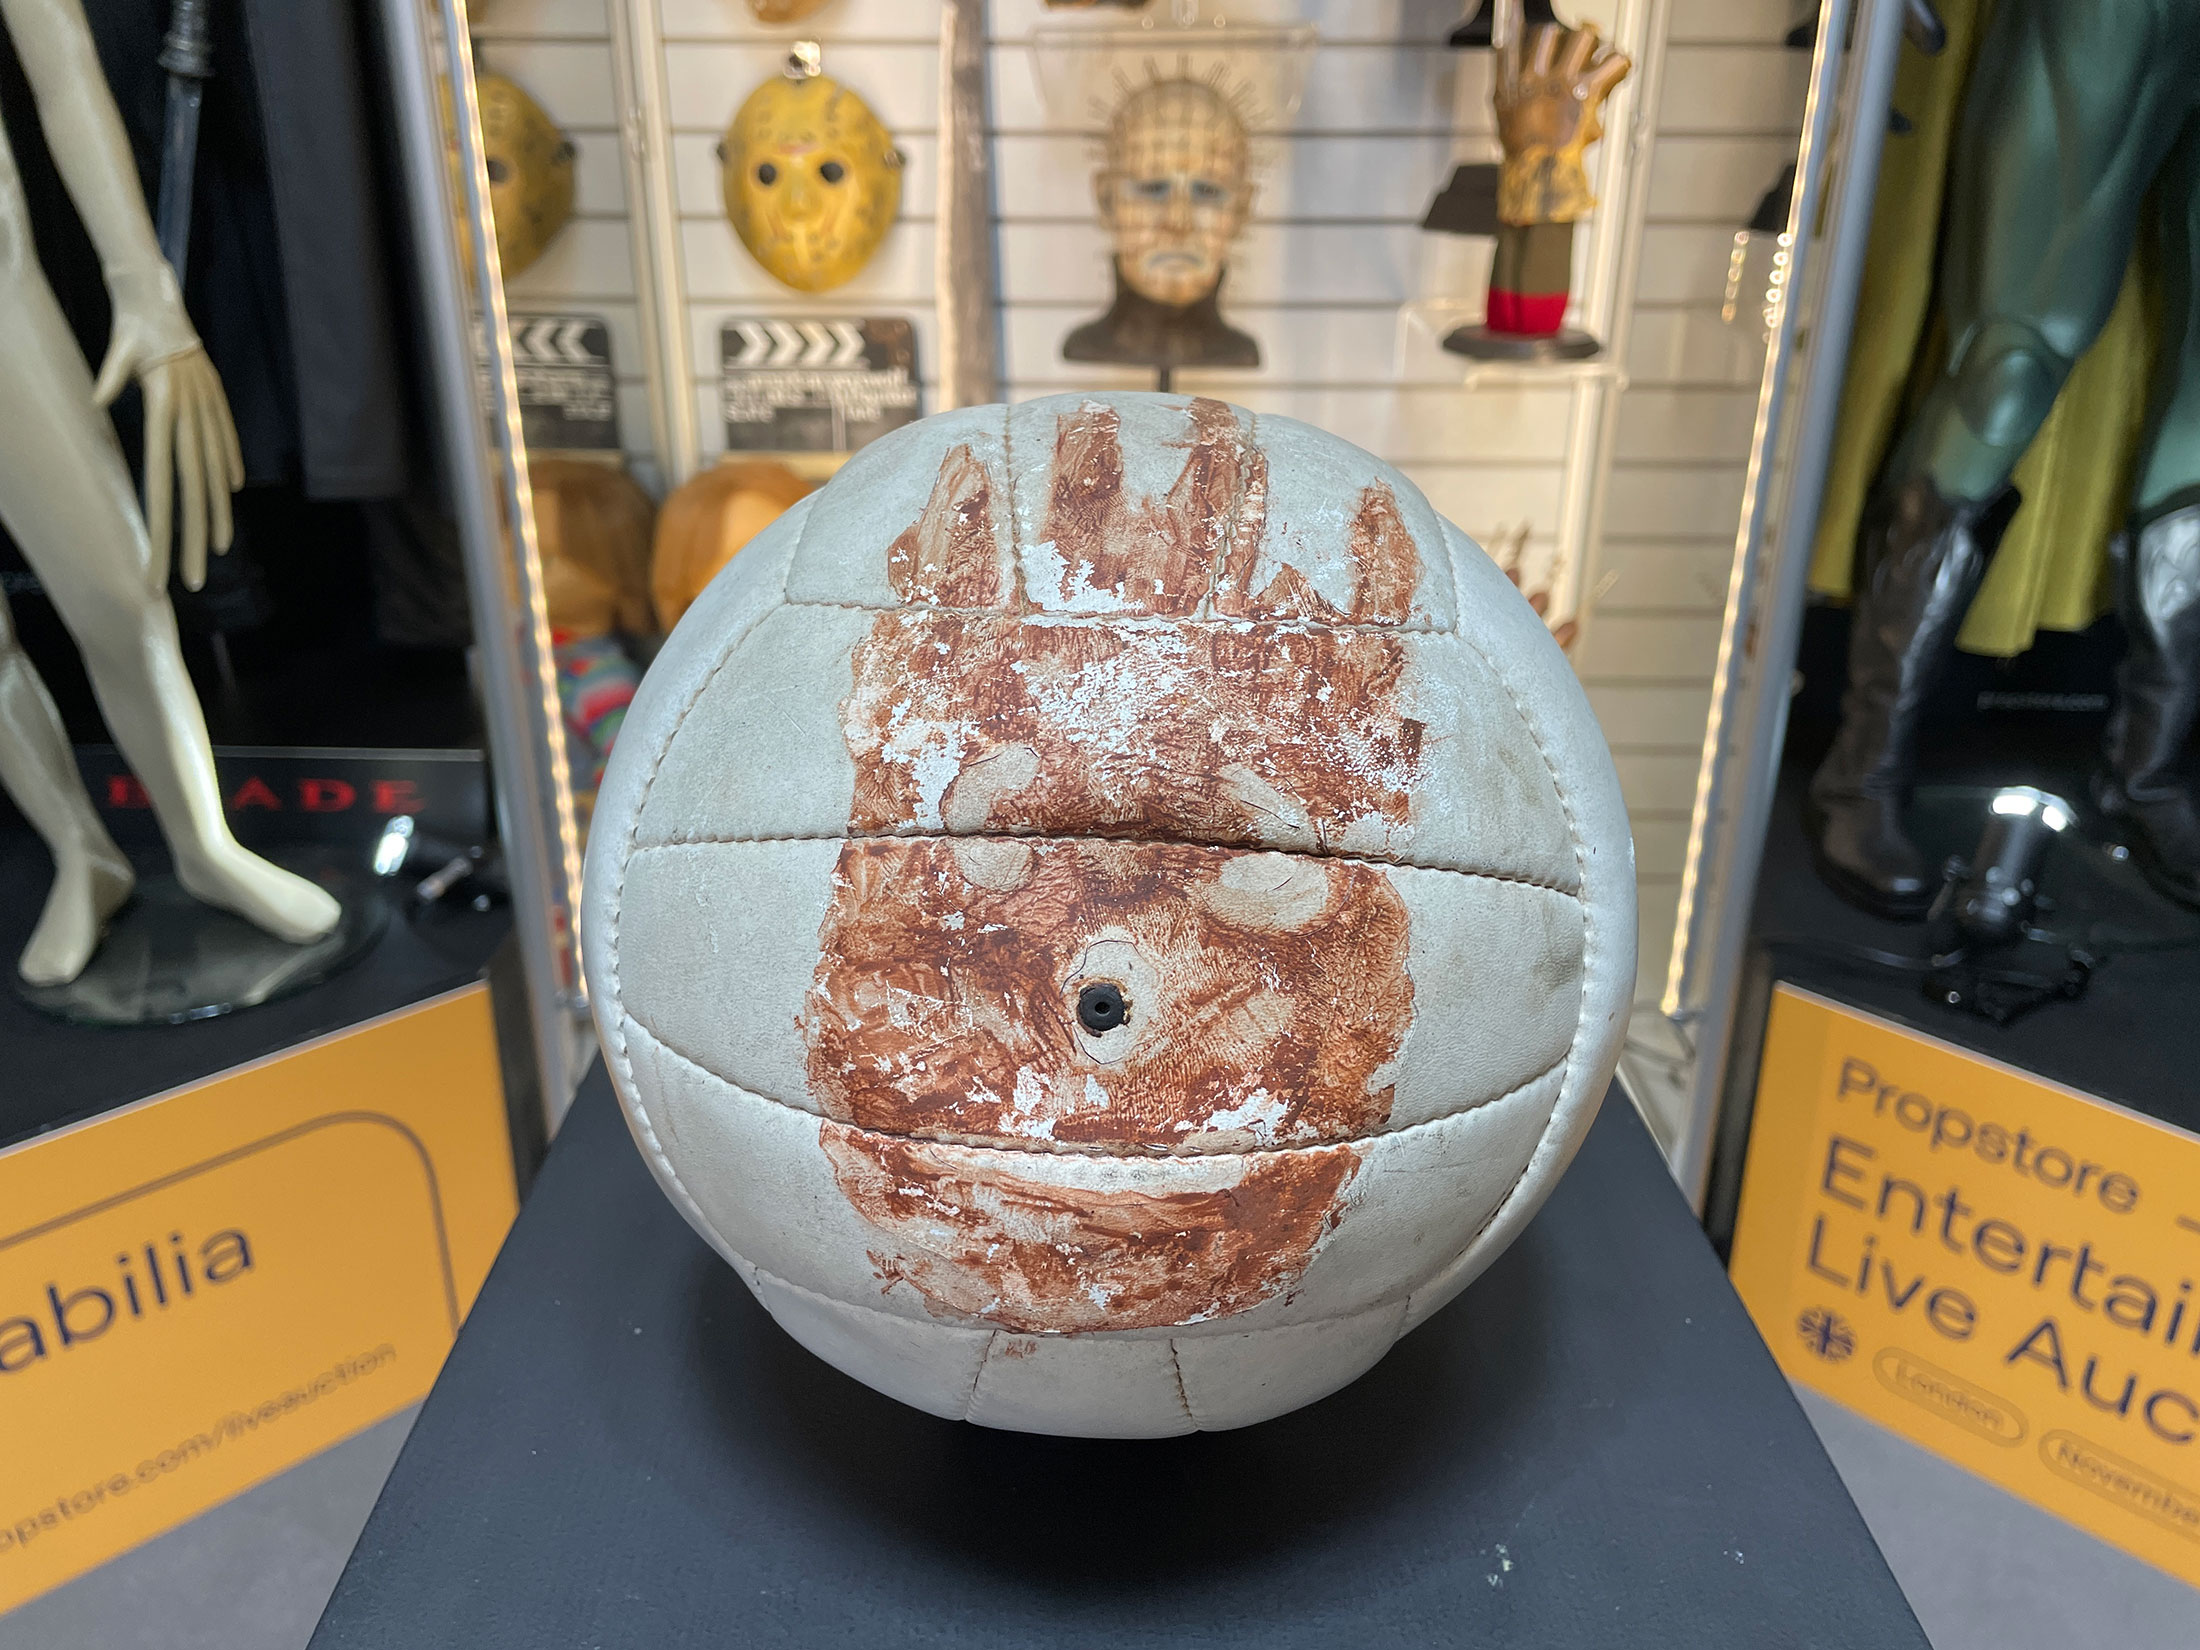 Movie Prop Auction Sees Wilson Volleyball Sell for £75,000